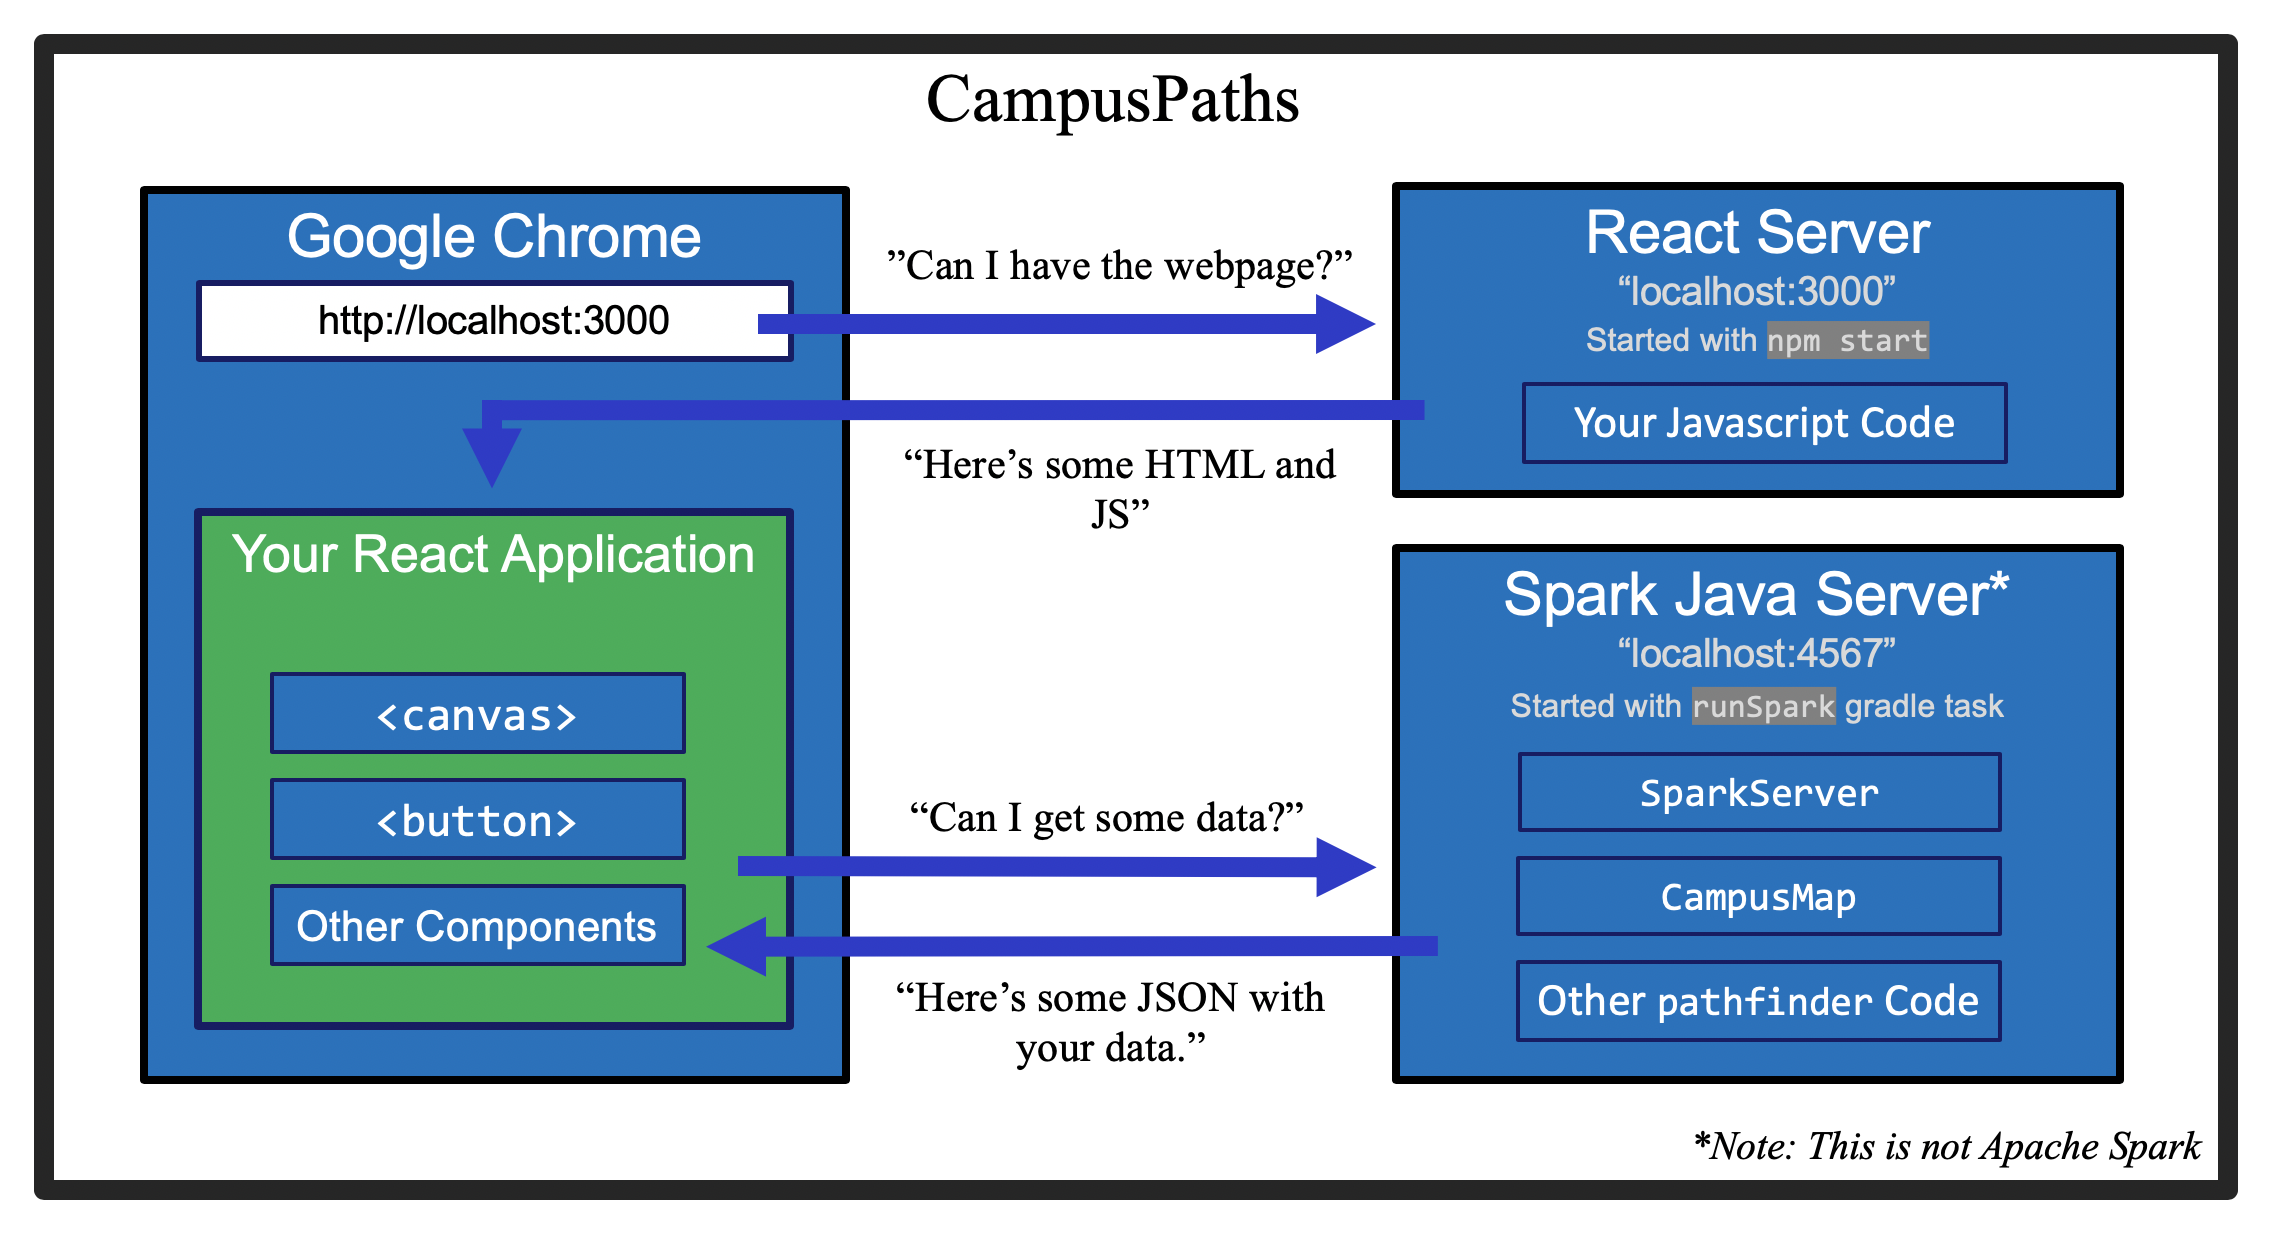 An Overview of the CampusPaths Application